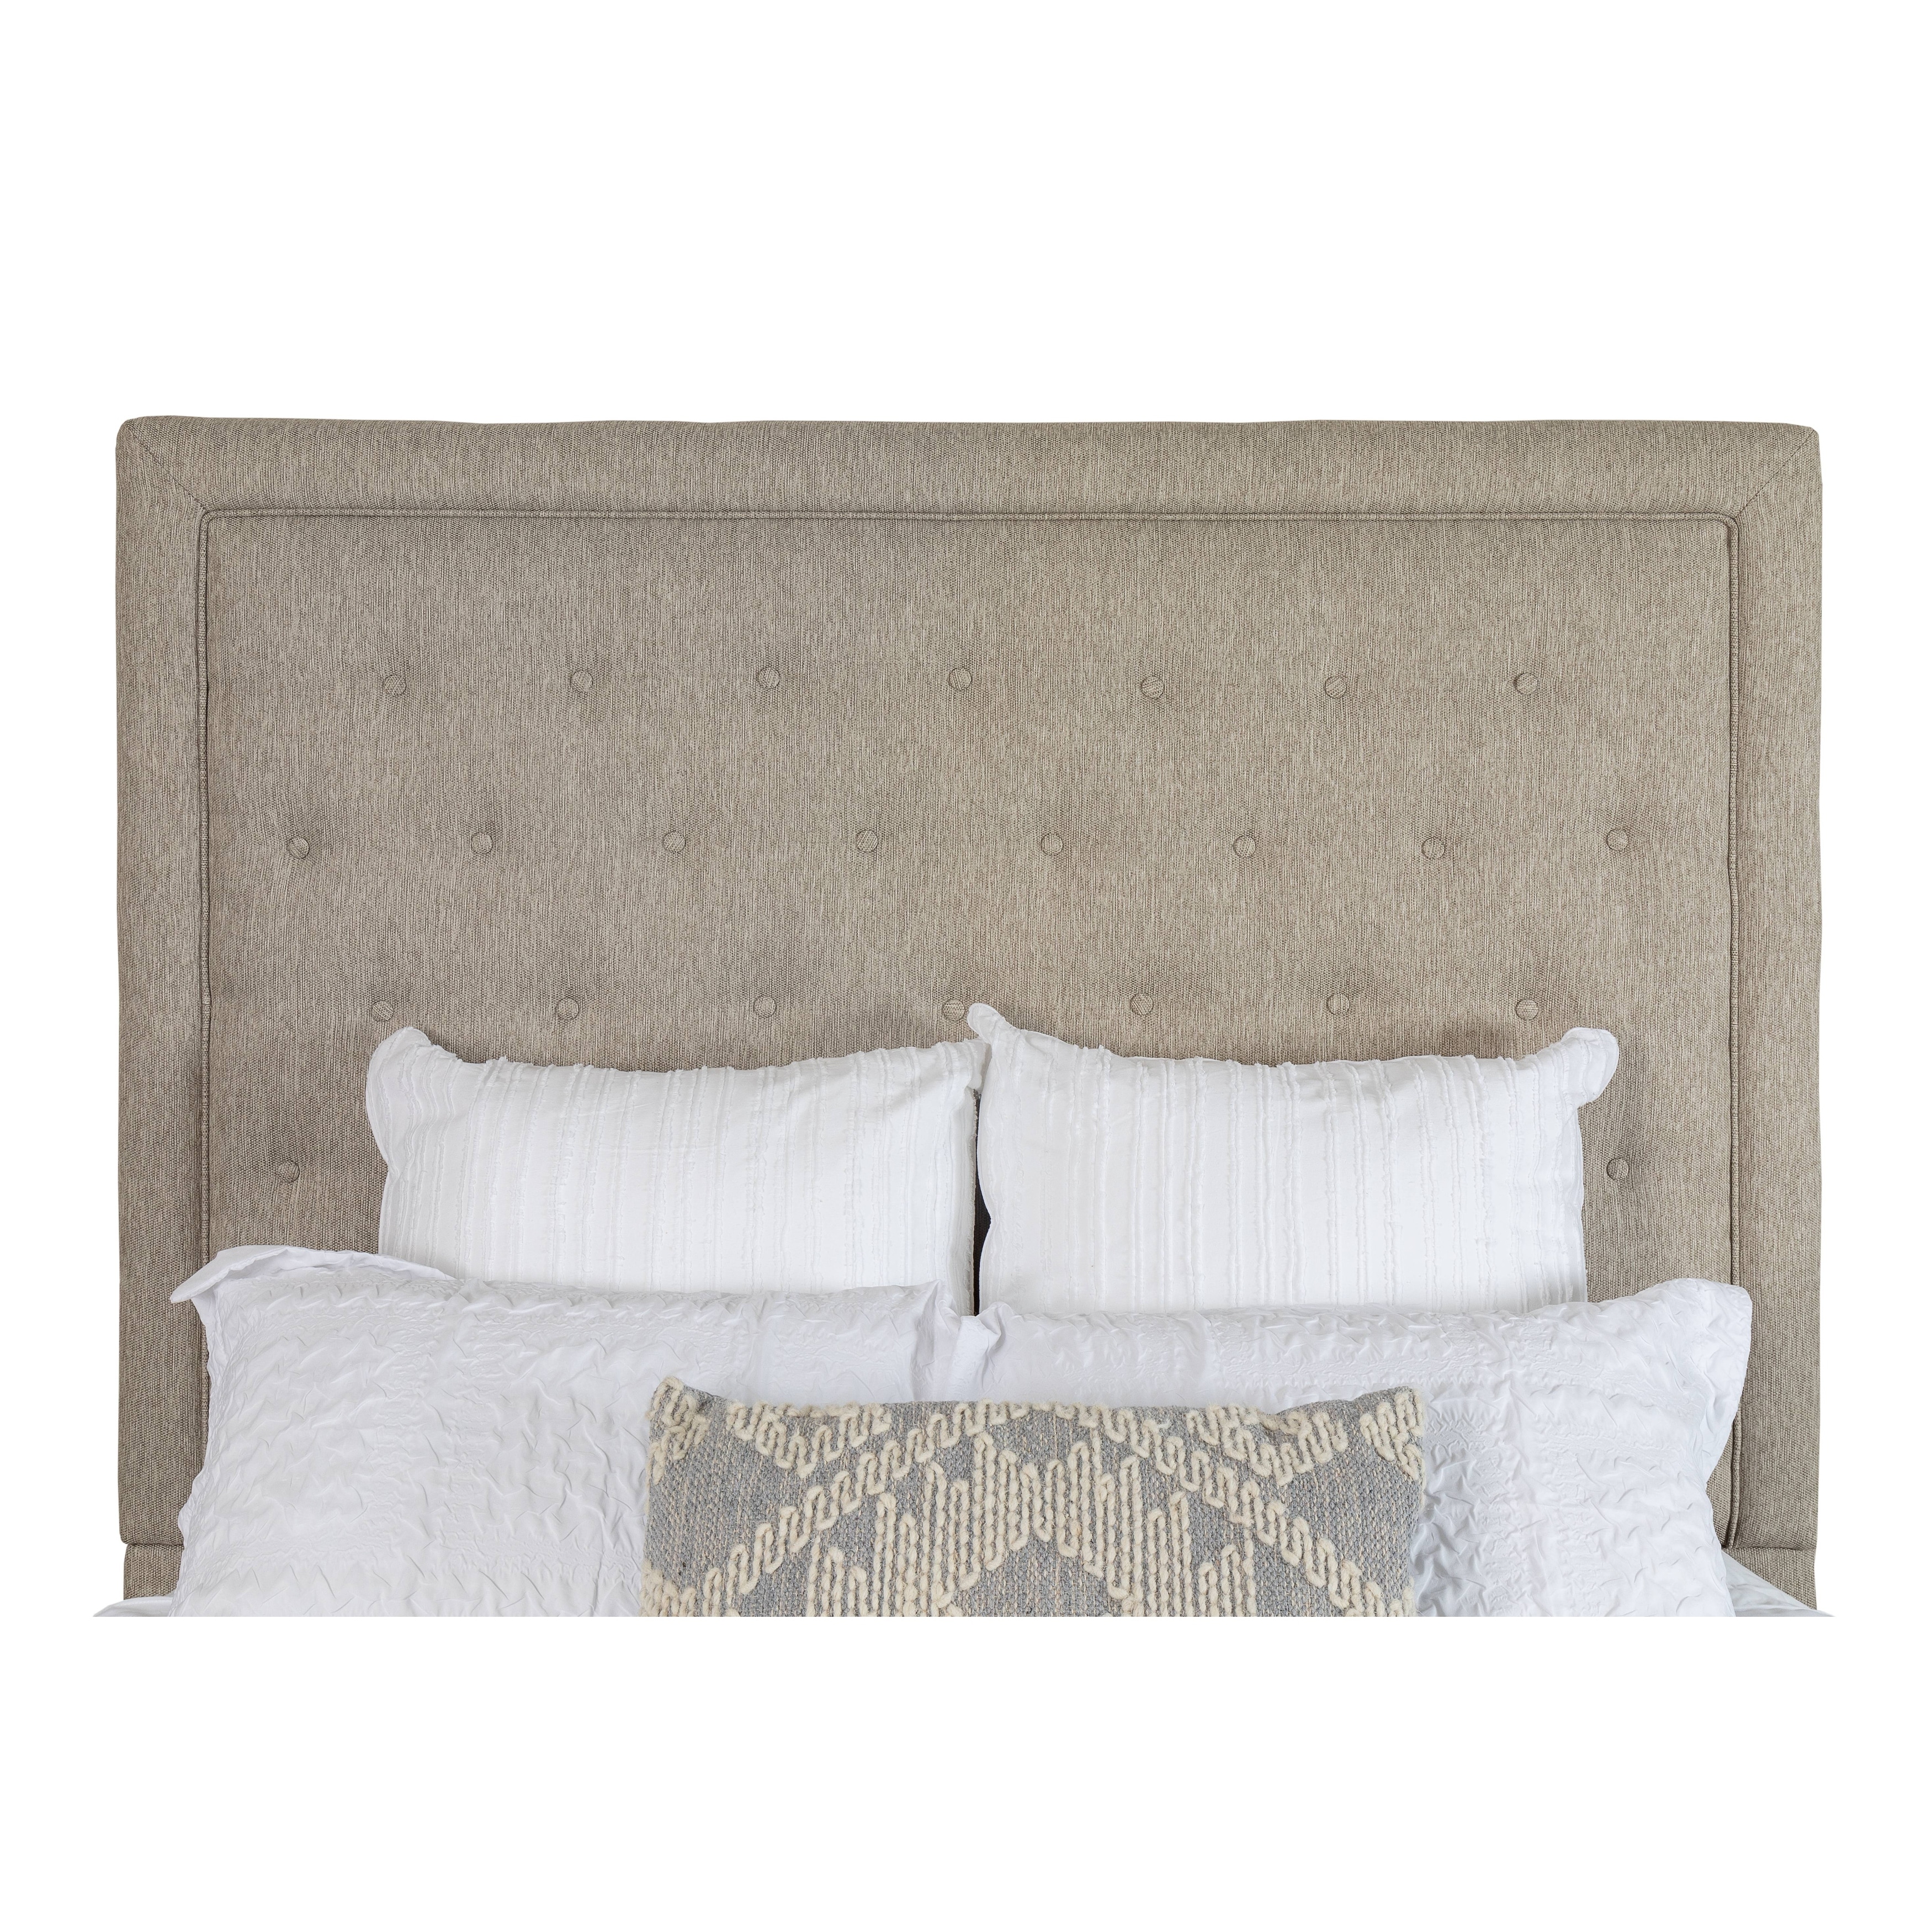 Eden Tufted Upholstered Queen Bed With Rails And Footboard On Sale Overstock 11534928